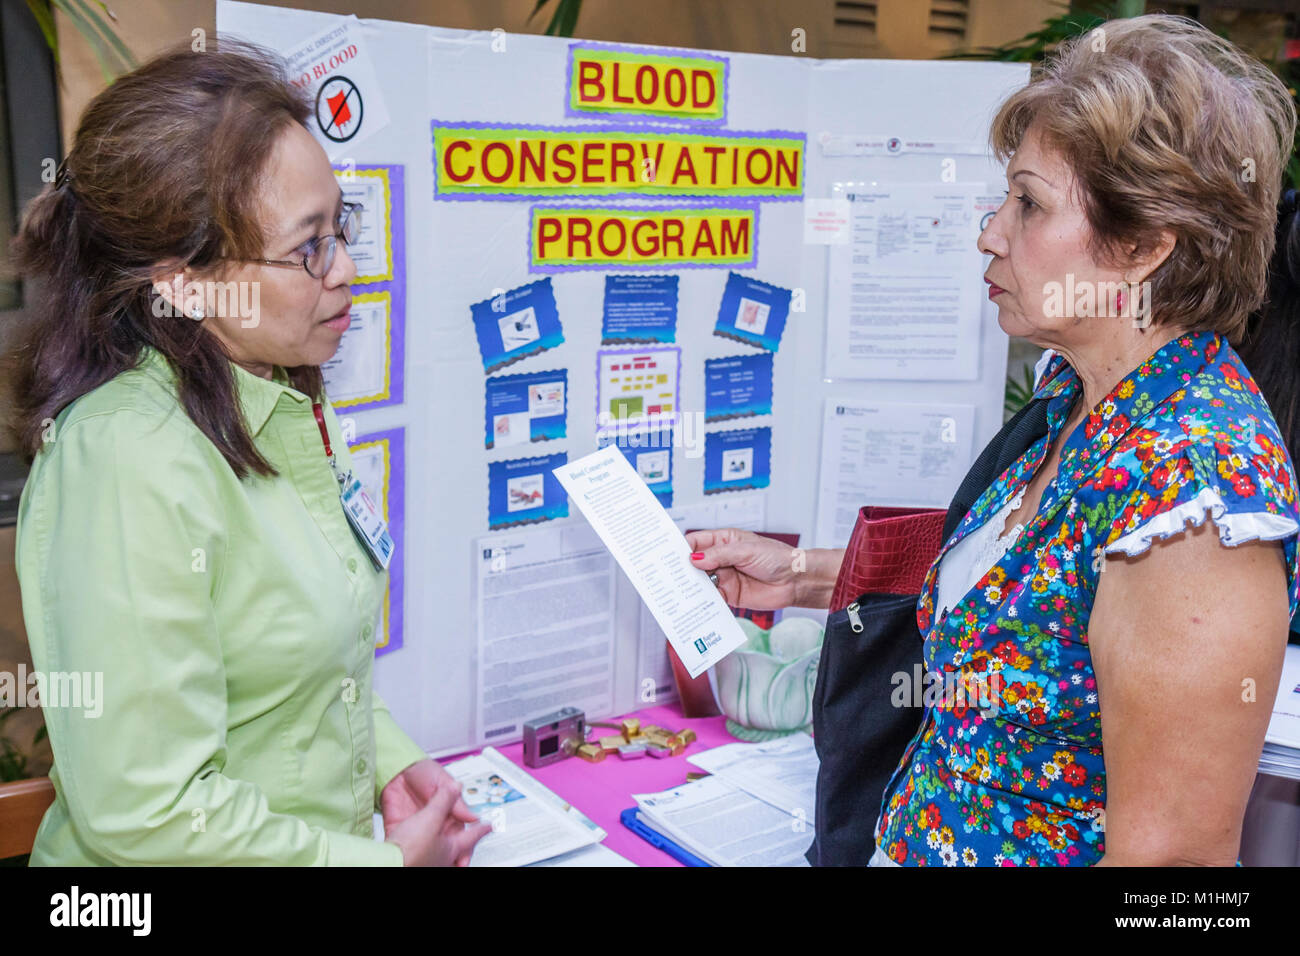 Miami Florida,Kendall,Baptist Health South Florida Hospital,healthcare,woman's,woman's Health Day,community event,Medical,Education,information, Foto Stock